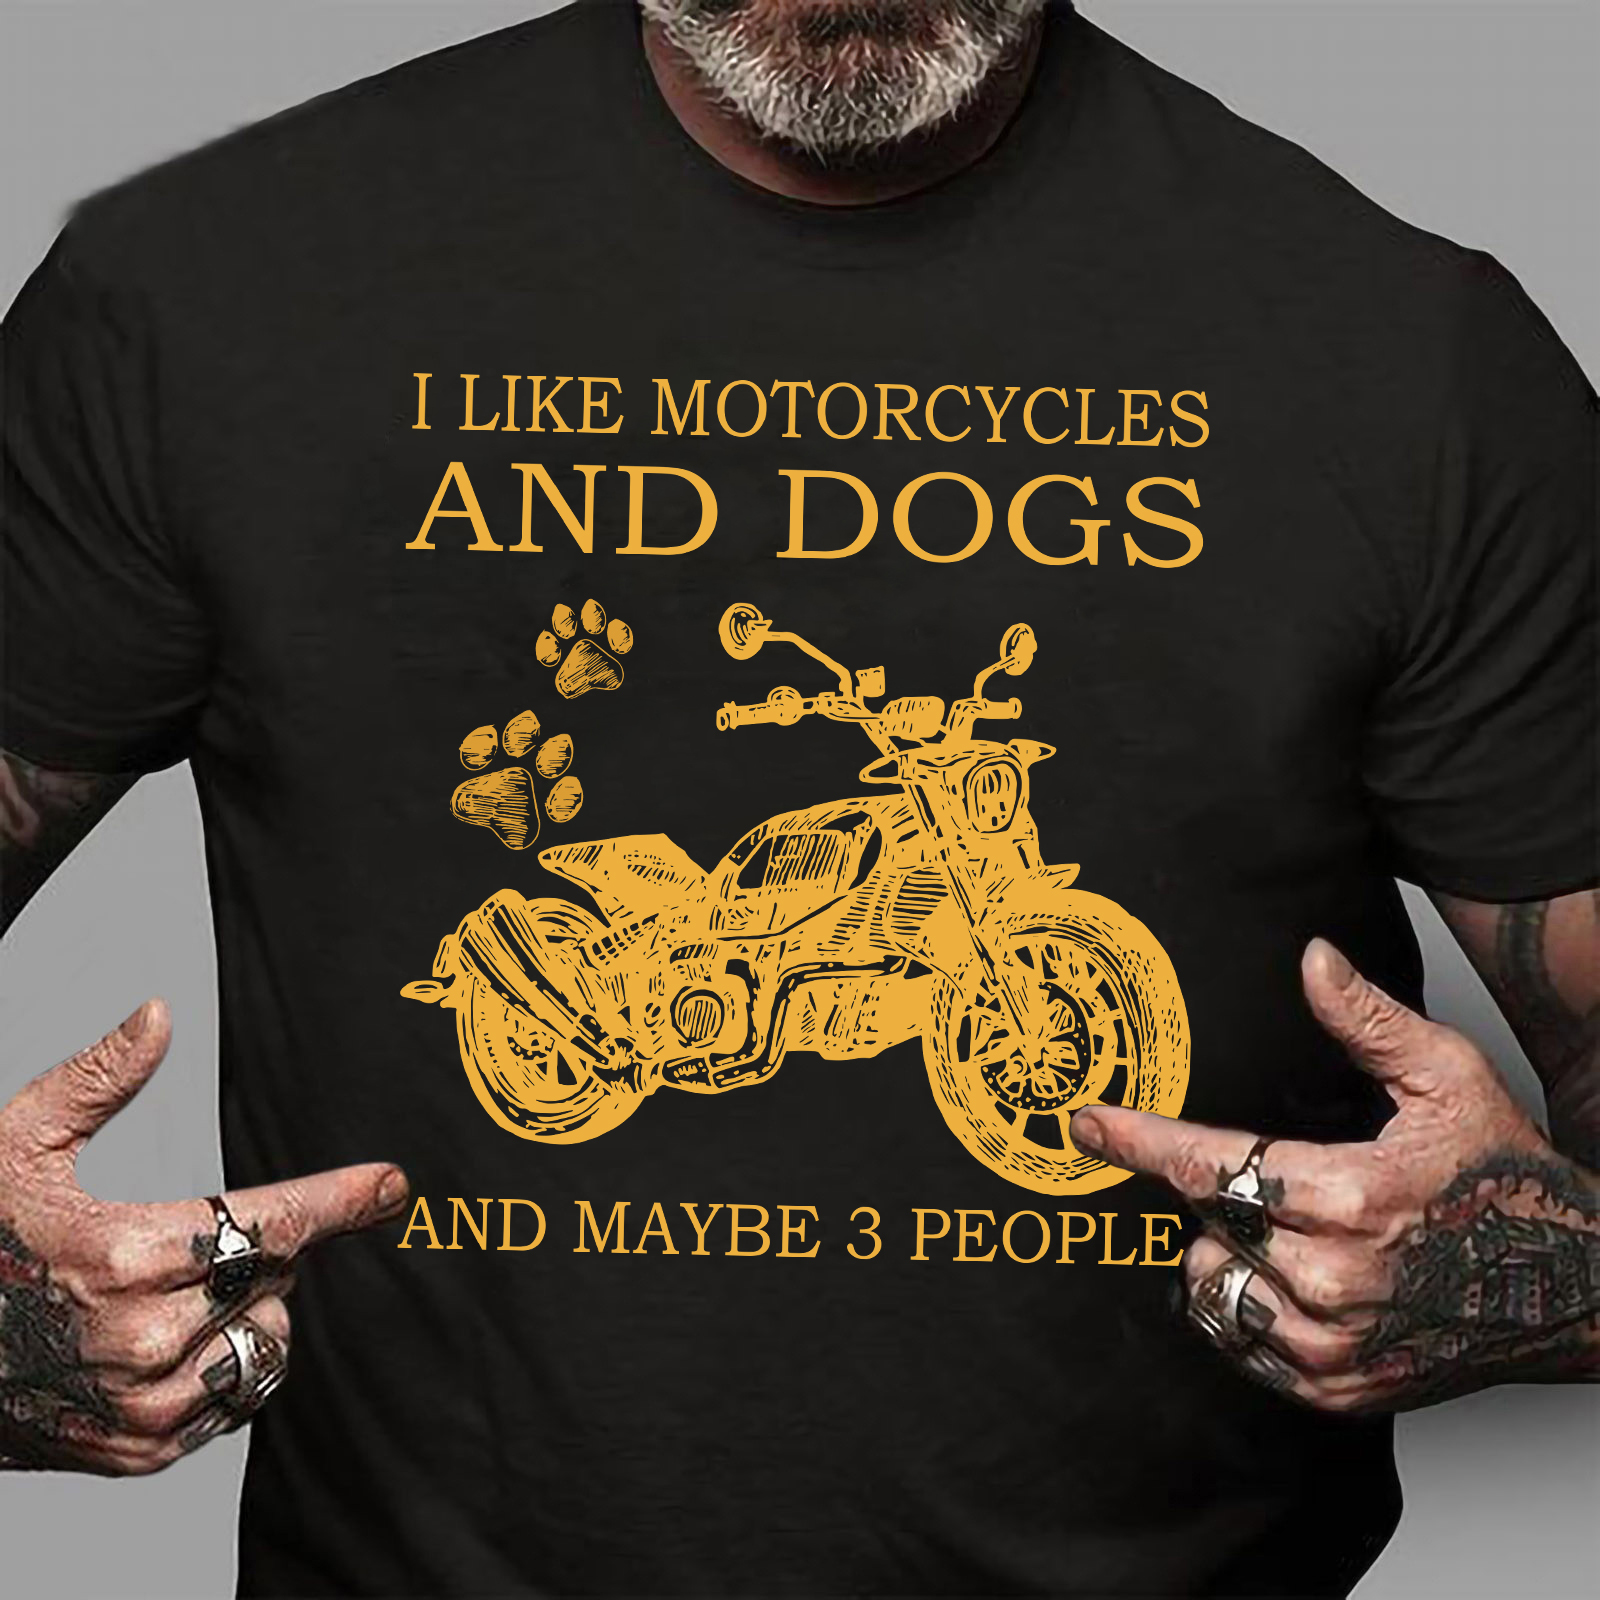 I like motorcycles and dogs and maybe 3 people